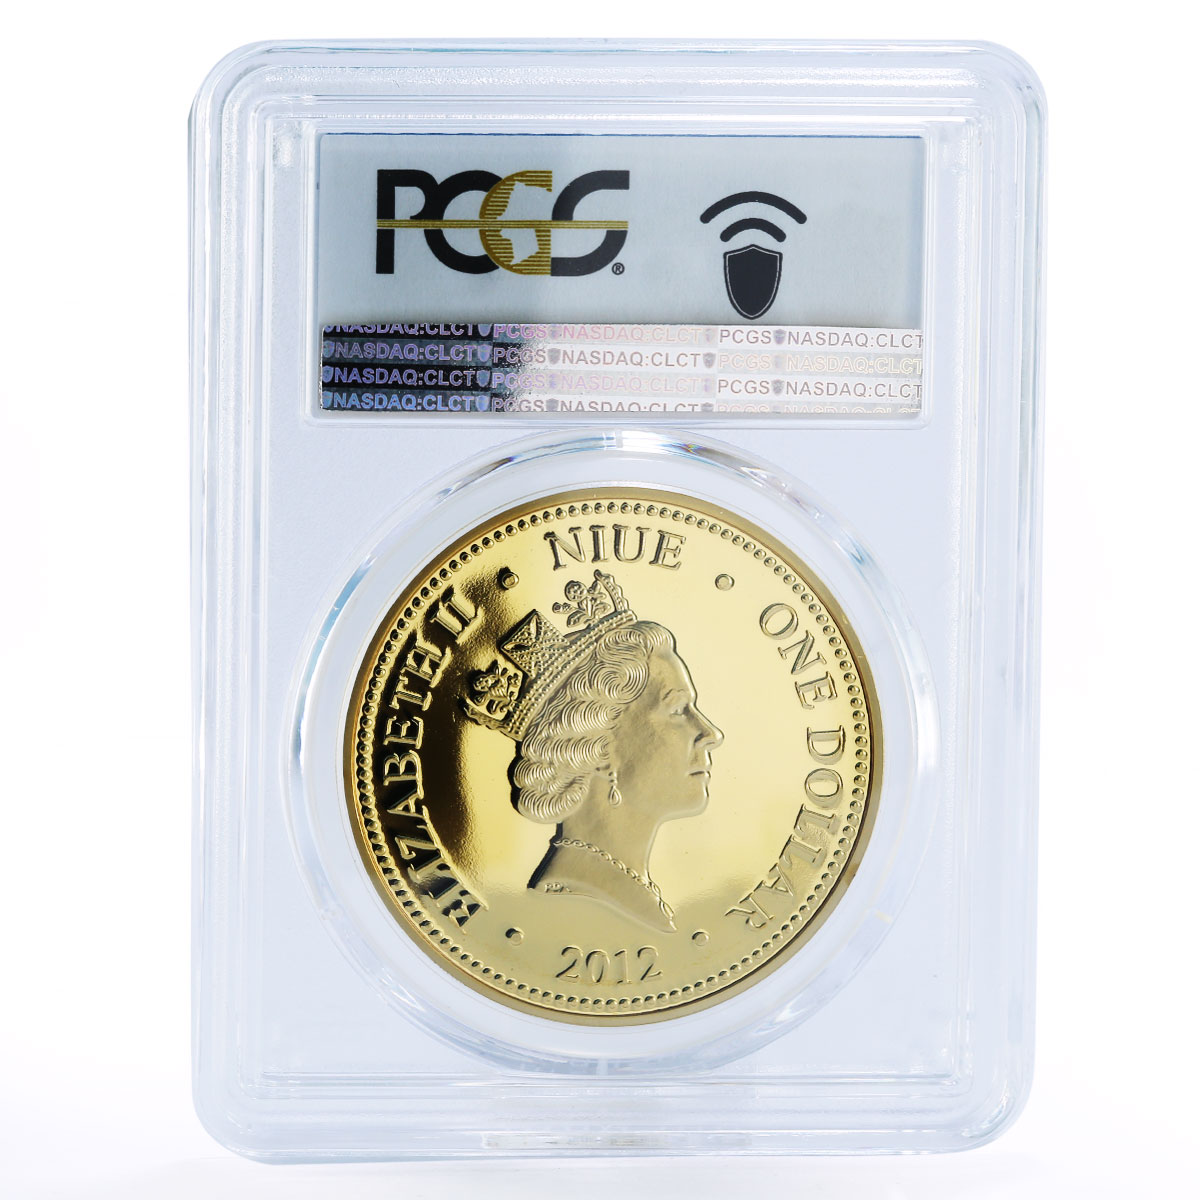 Niue 1 dollar Star Wars series Jabba the Hutt MS69 PCGS gilded copper coin 2012